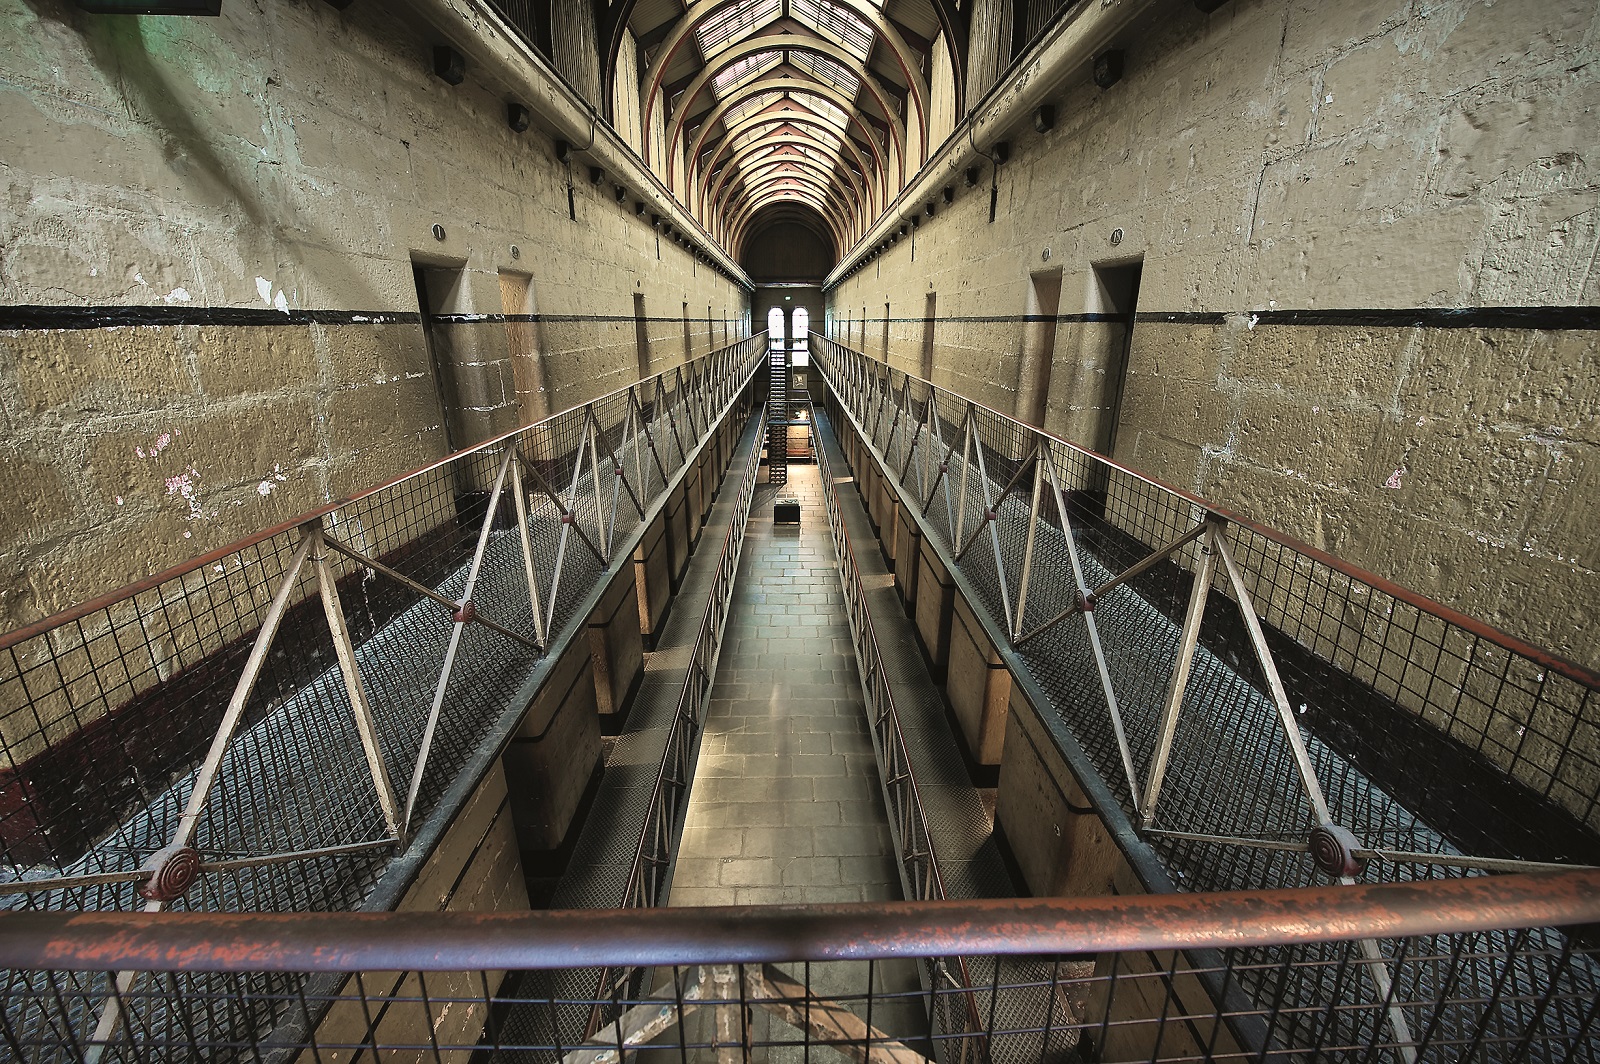 Australia, Victoria, Melbourne, Old Melbourne Goal where was executed Ned Kelly,Image: 212834350, License: Rights-managed, Restrictions: , Model Release: no, Credit line: - / Hemis / Profimedia